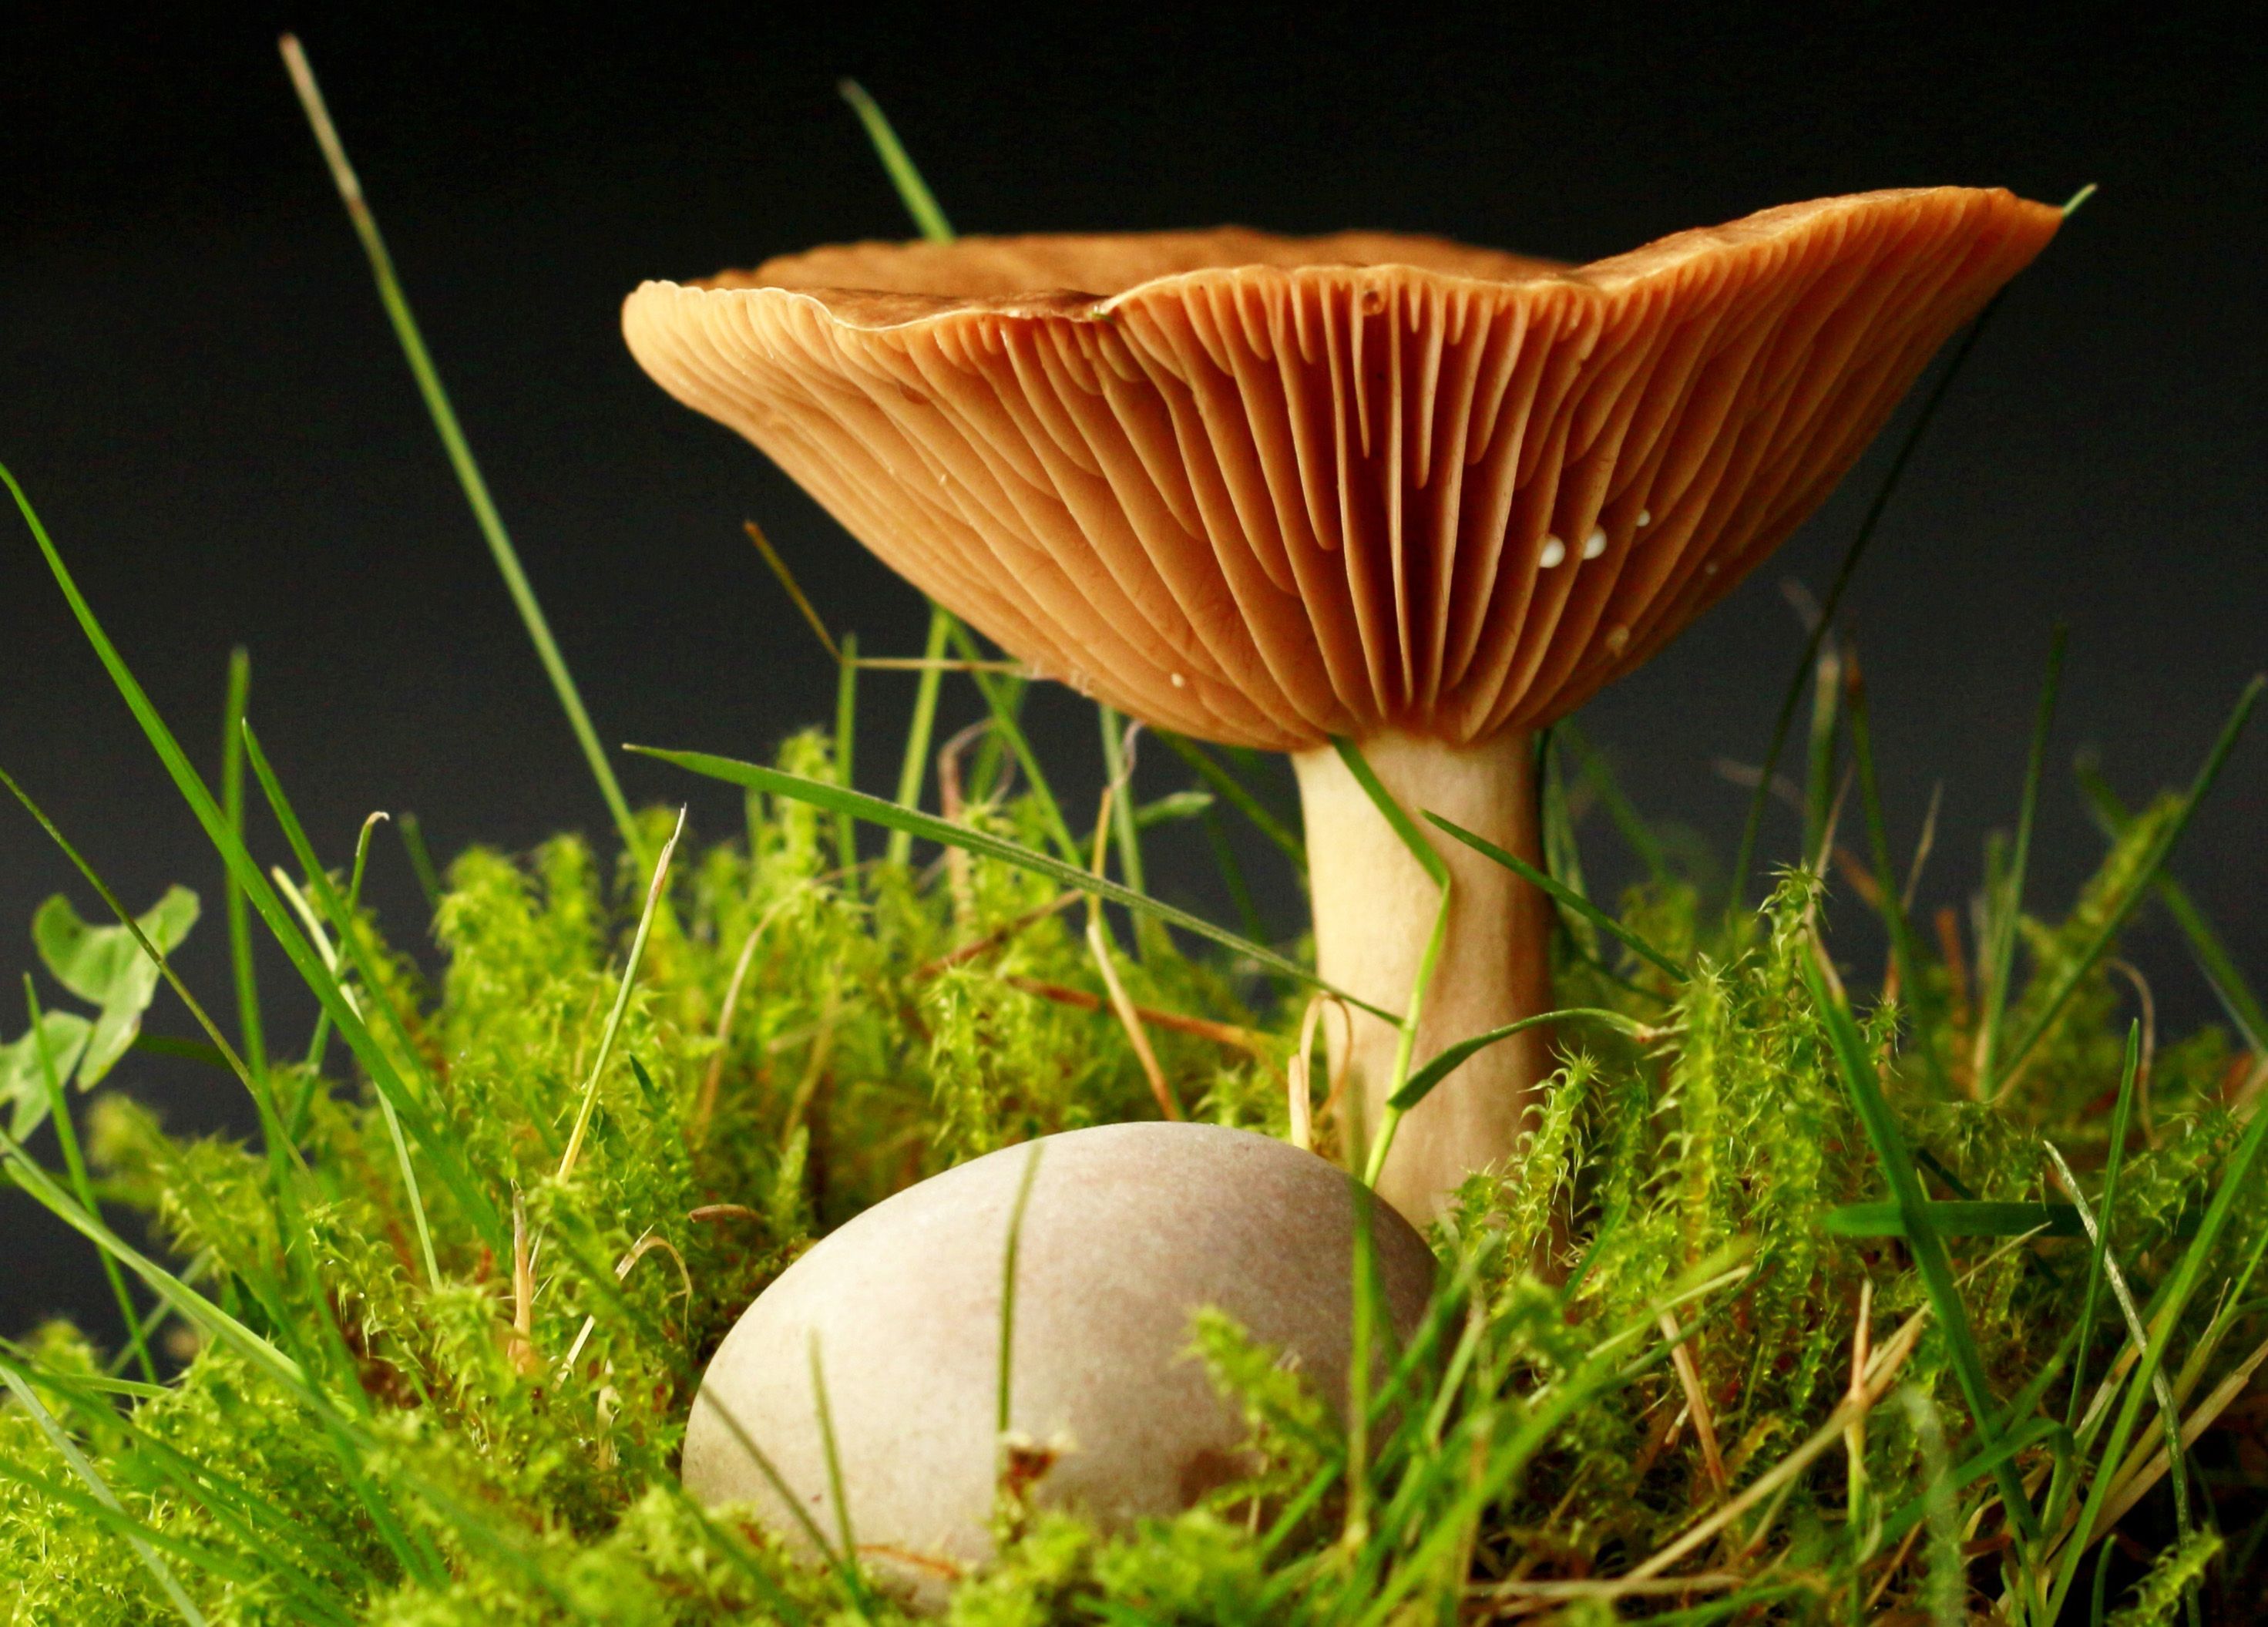 94 Fantastic Free Image for a Mushroom Wallpaper, Backgrounds or Texture